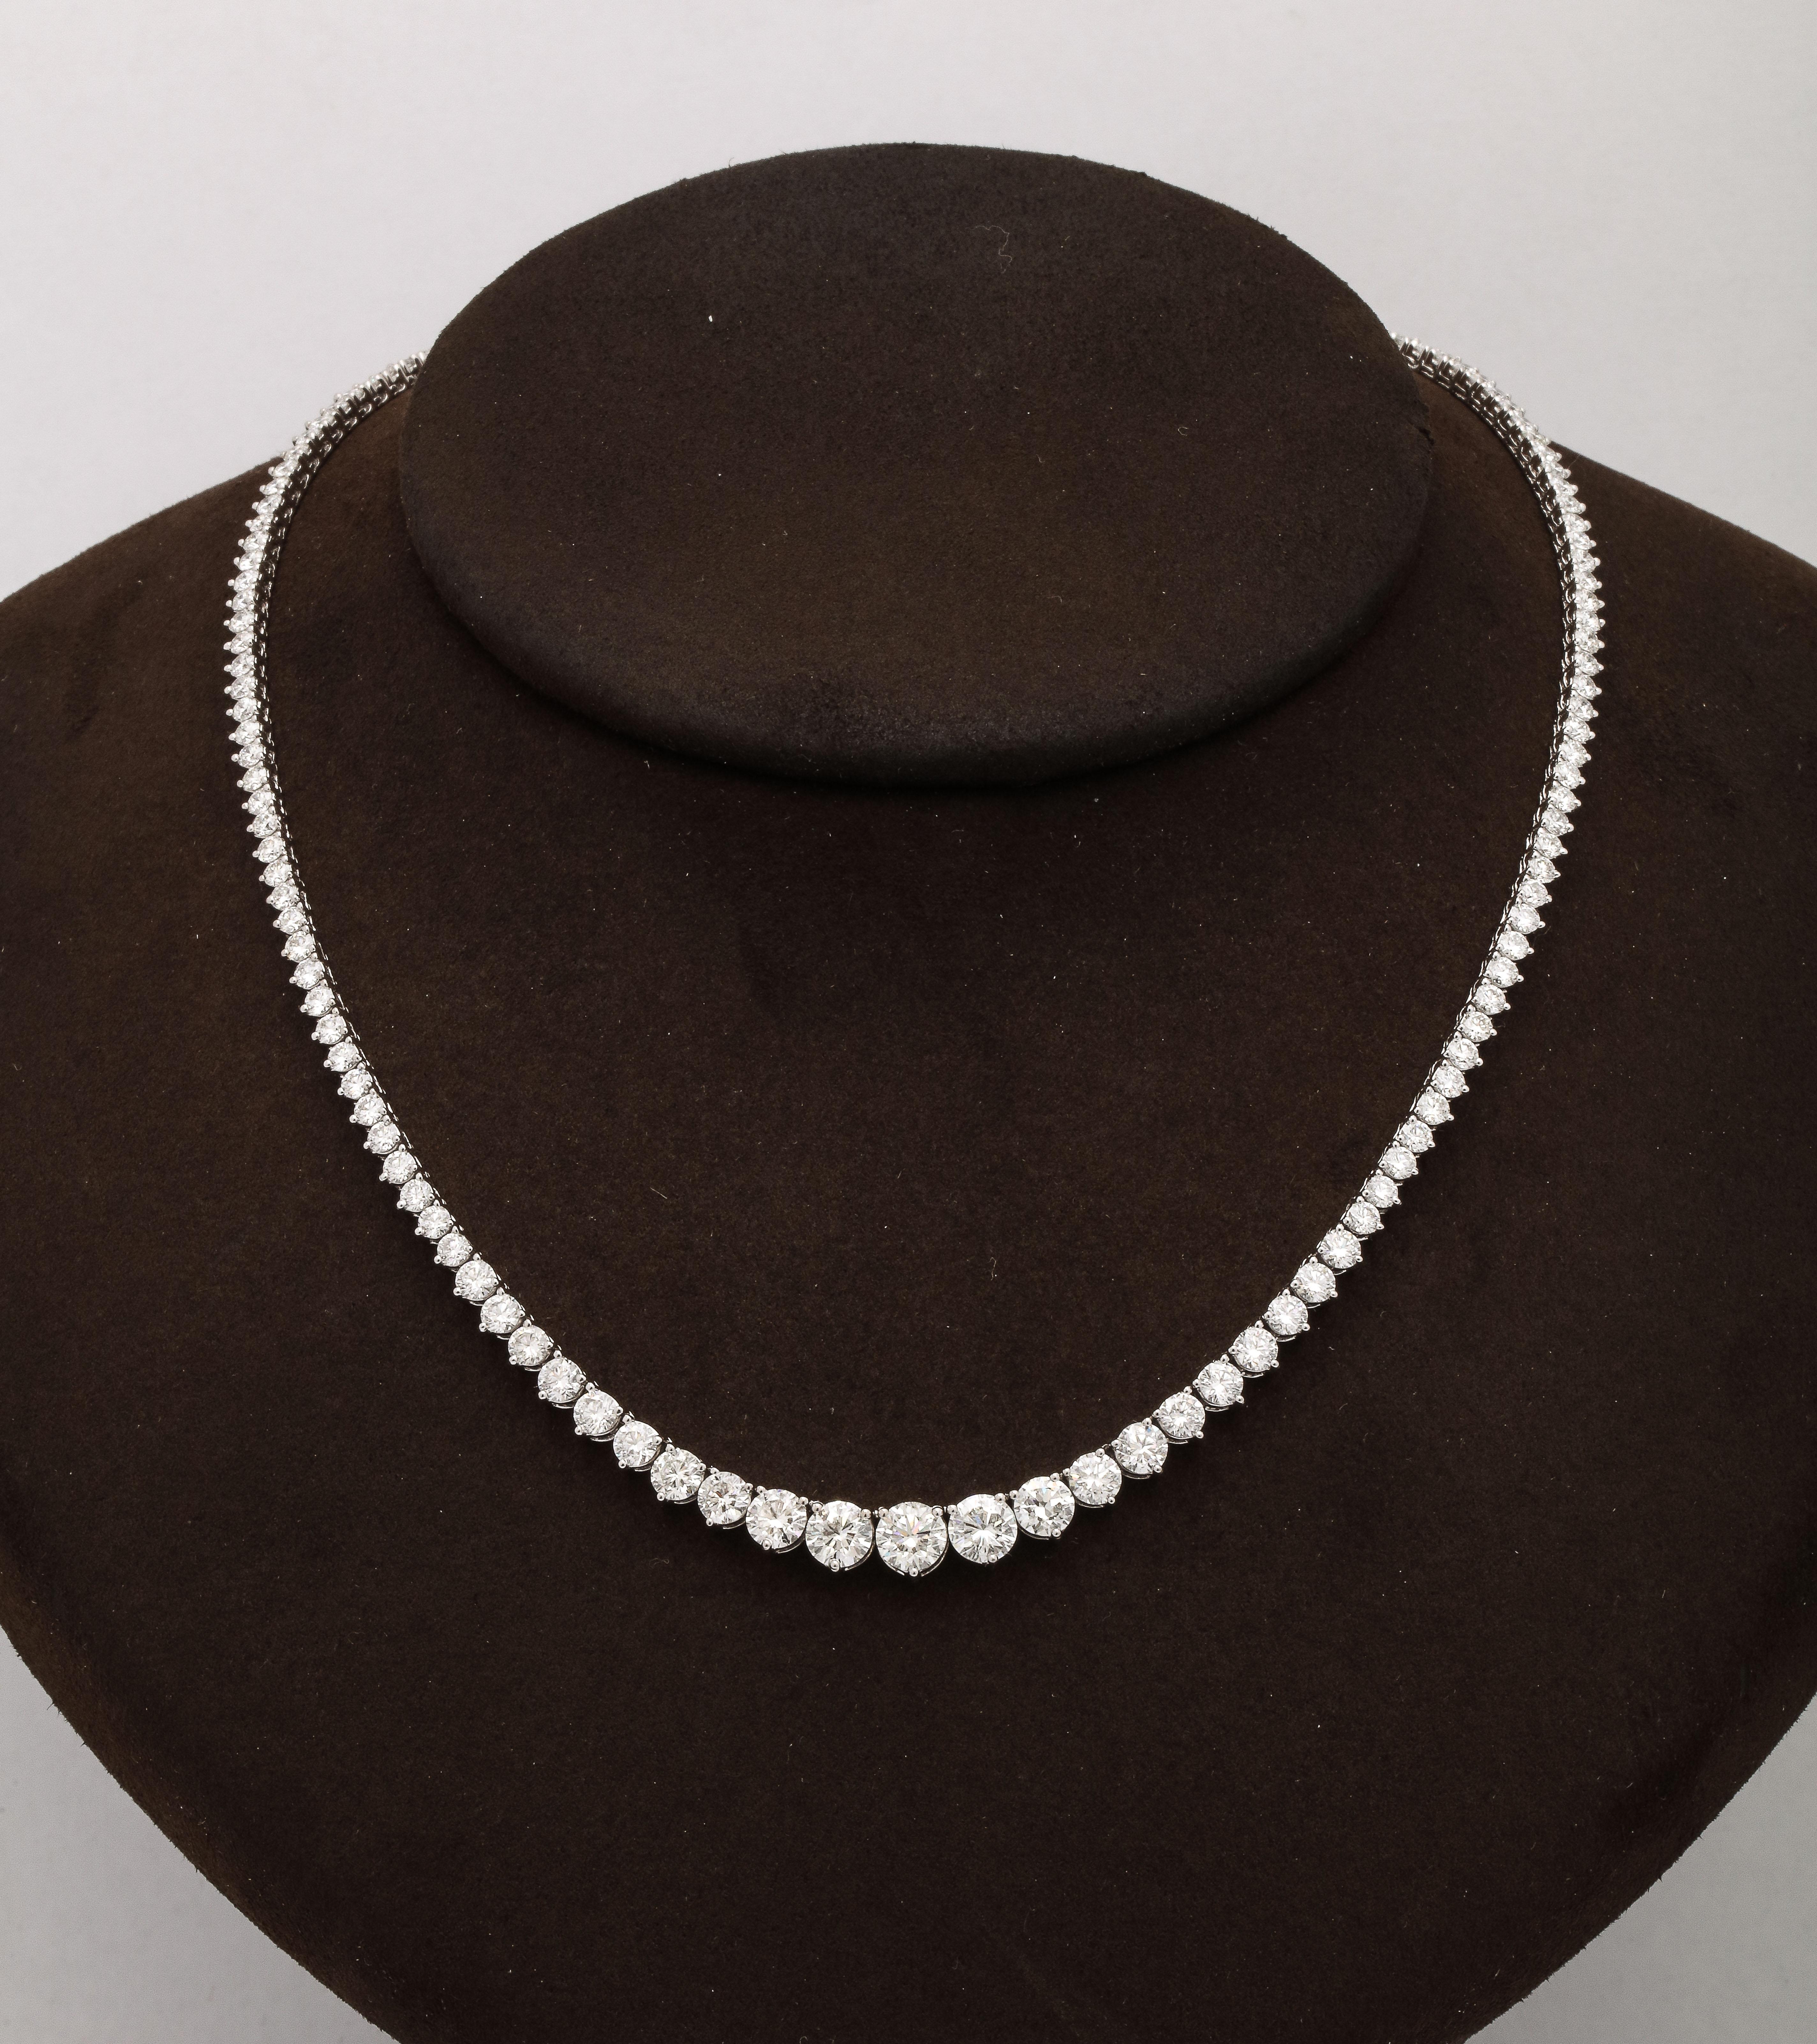 
Beautiful Diamond Riviere graduated tennis necklace. 

14.15 carats of white FG color VS clarity diamonds set in 18k white gold. 

The diamonds are vibrant and full of sparkle, they are set in a 3 prong style mounting. 

16 inch length. 


